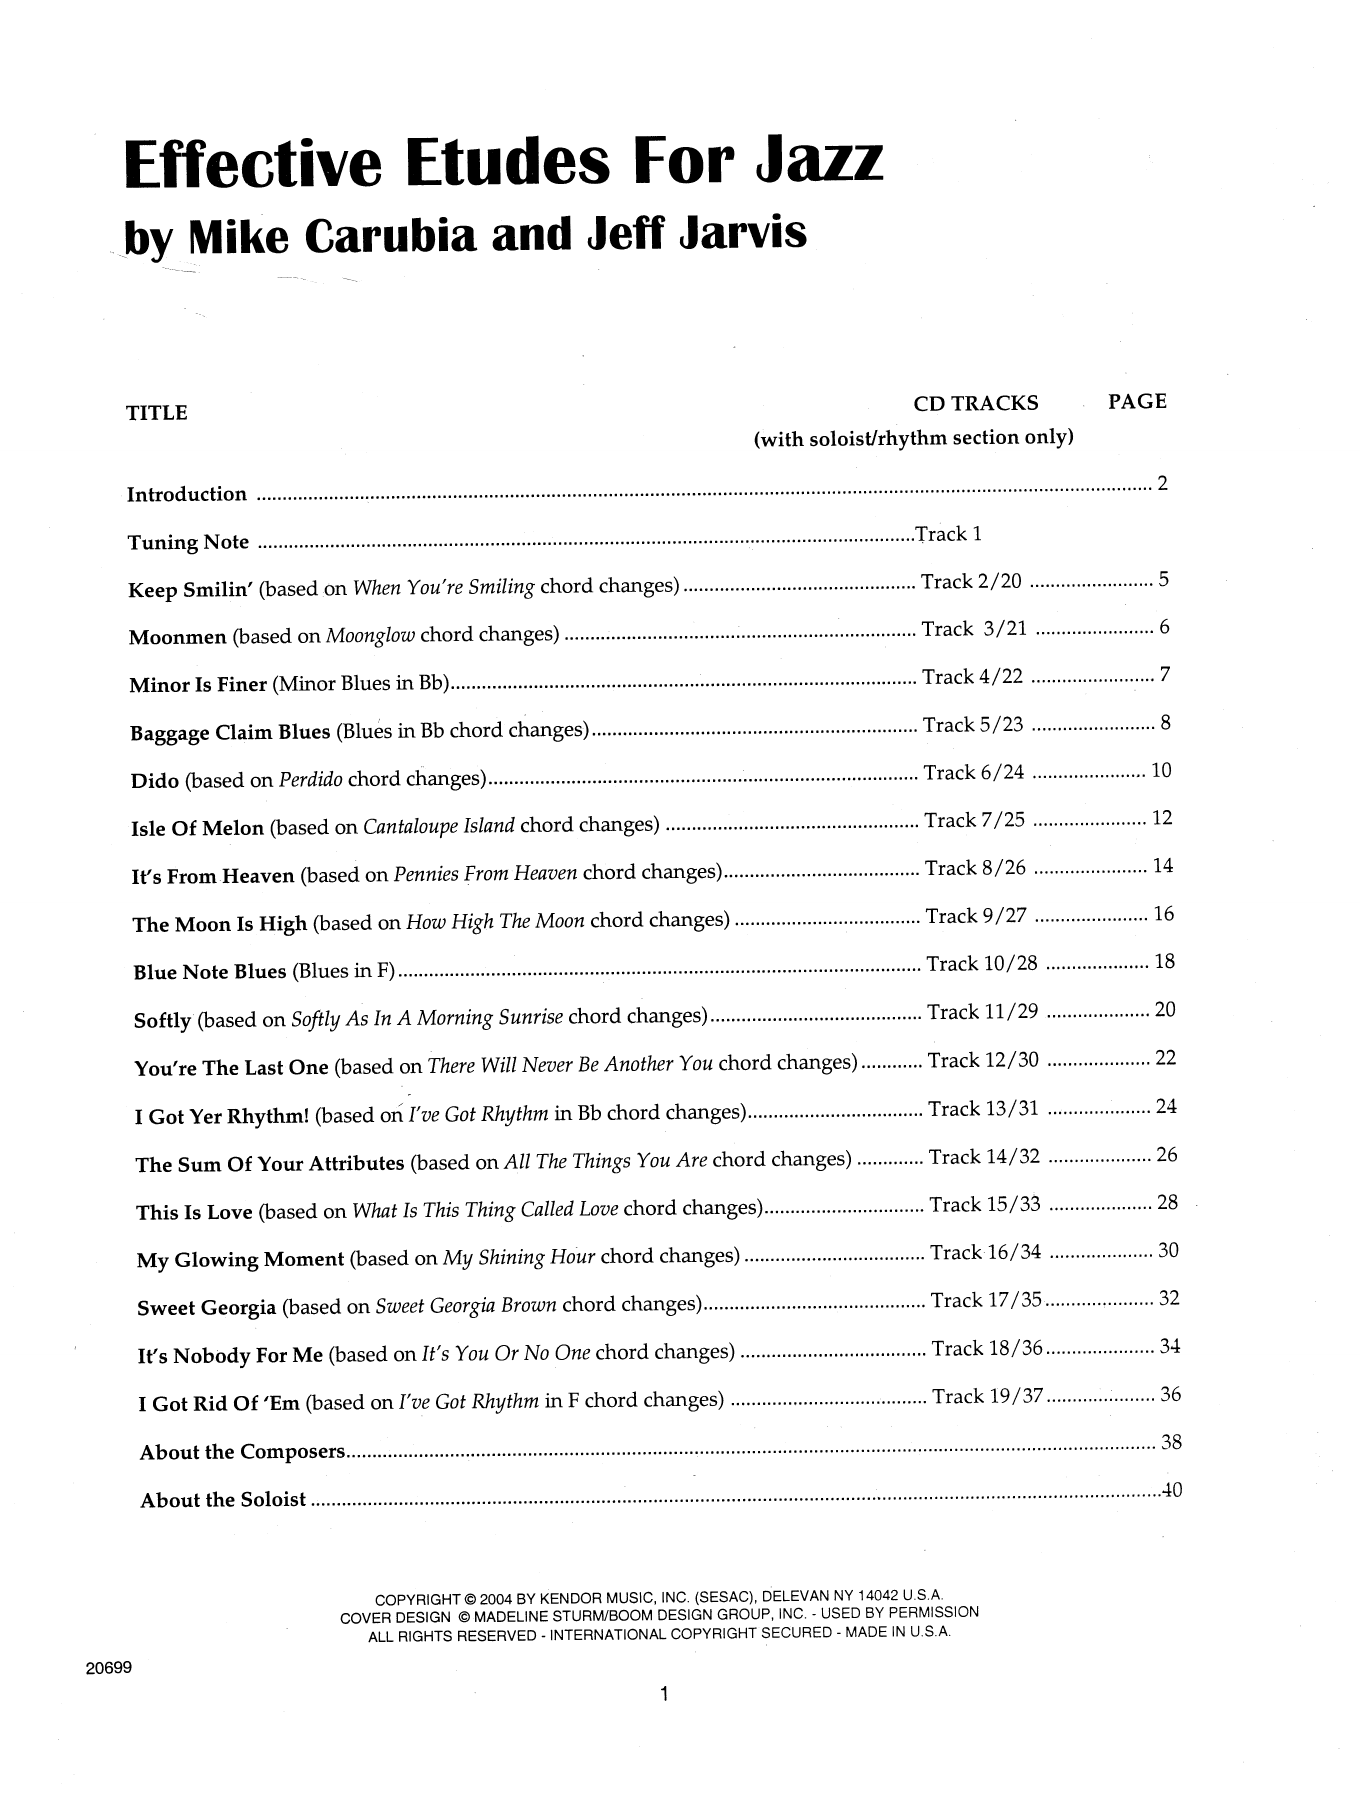 Download Mike Carubia & Jeff Jarvis Effective Etudes For Jazz - Bass Sheet Music